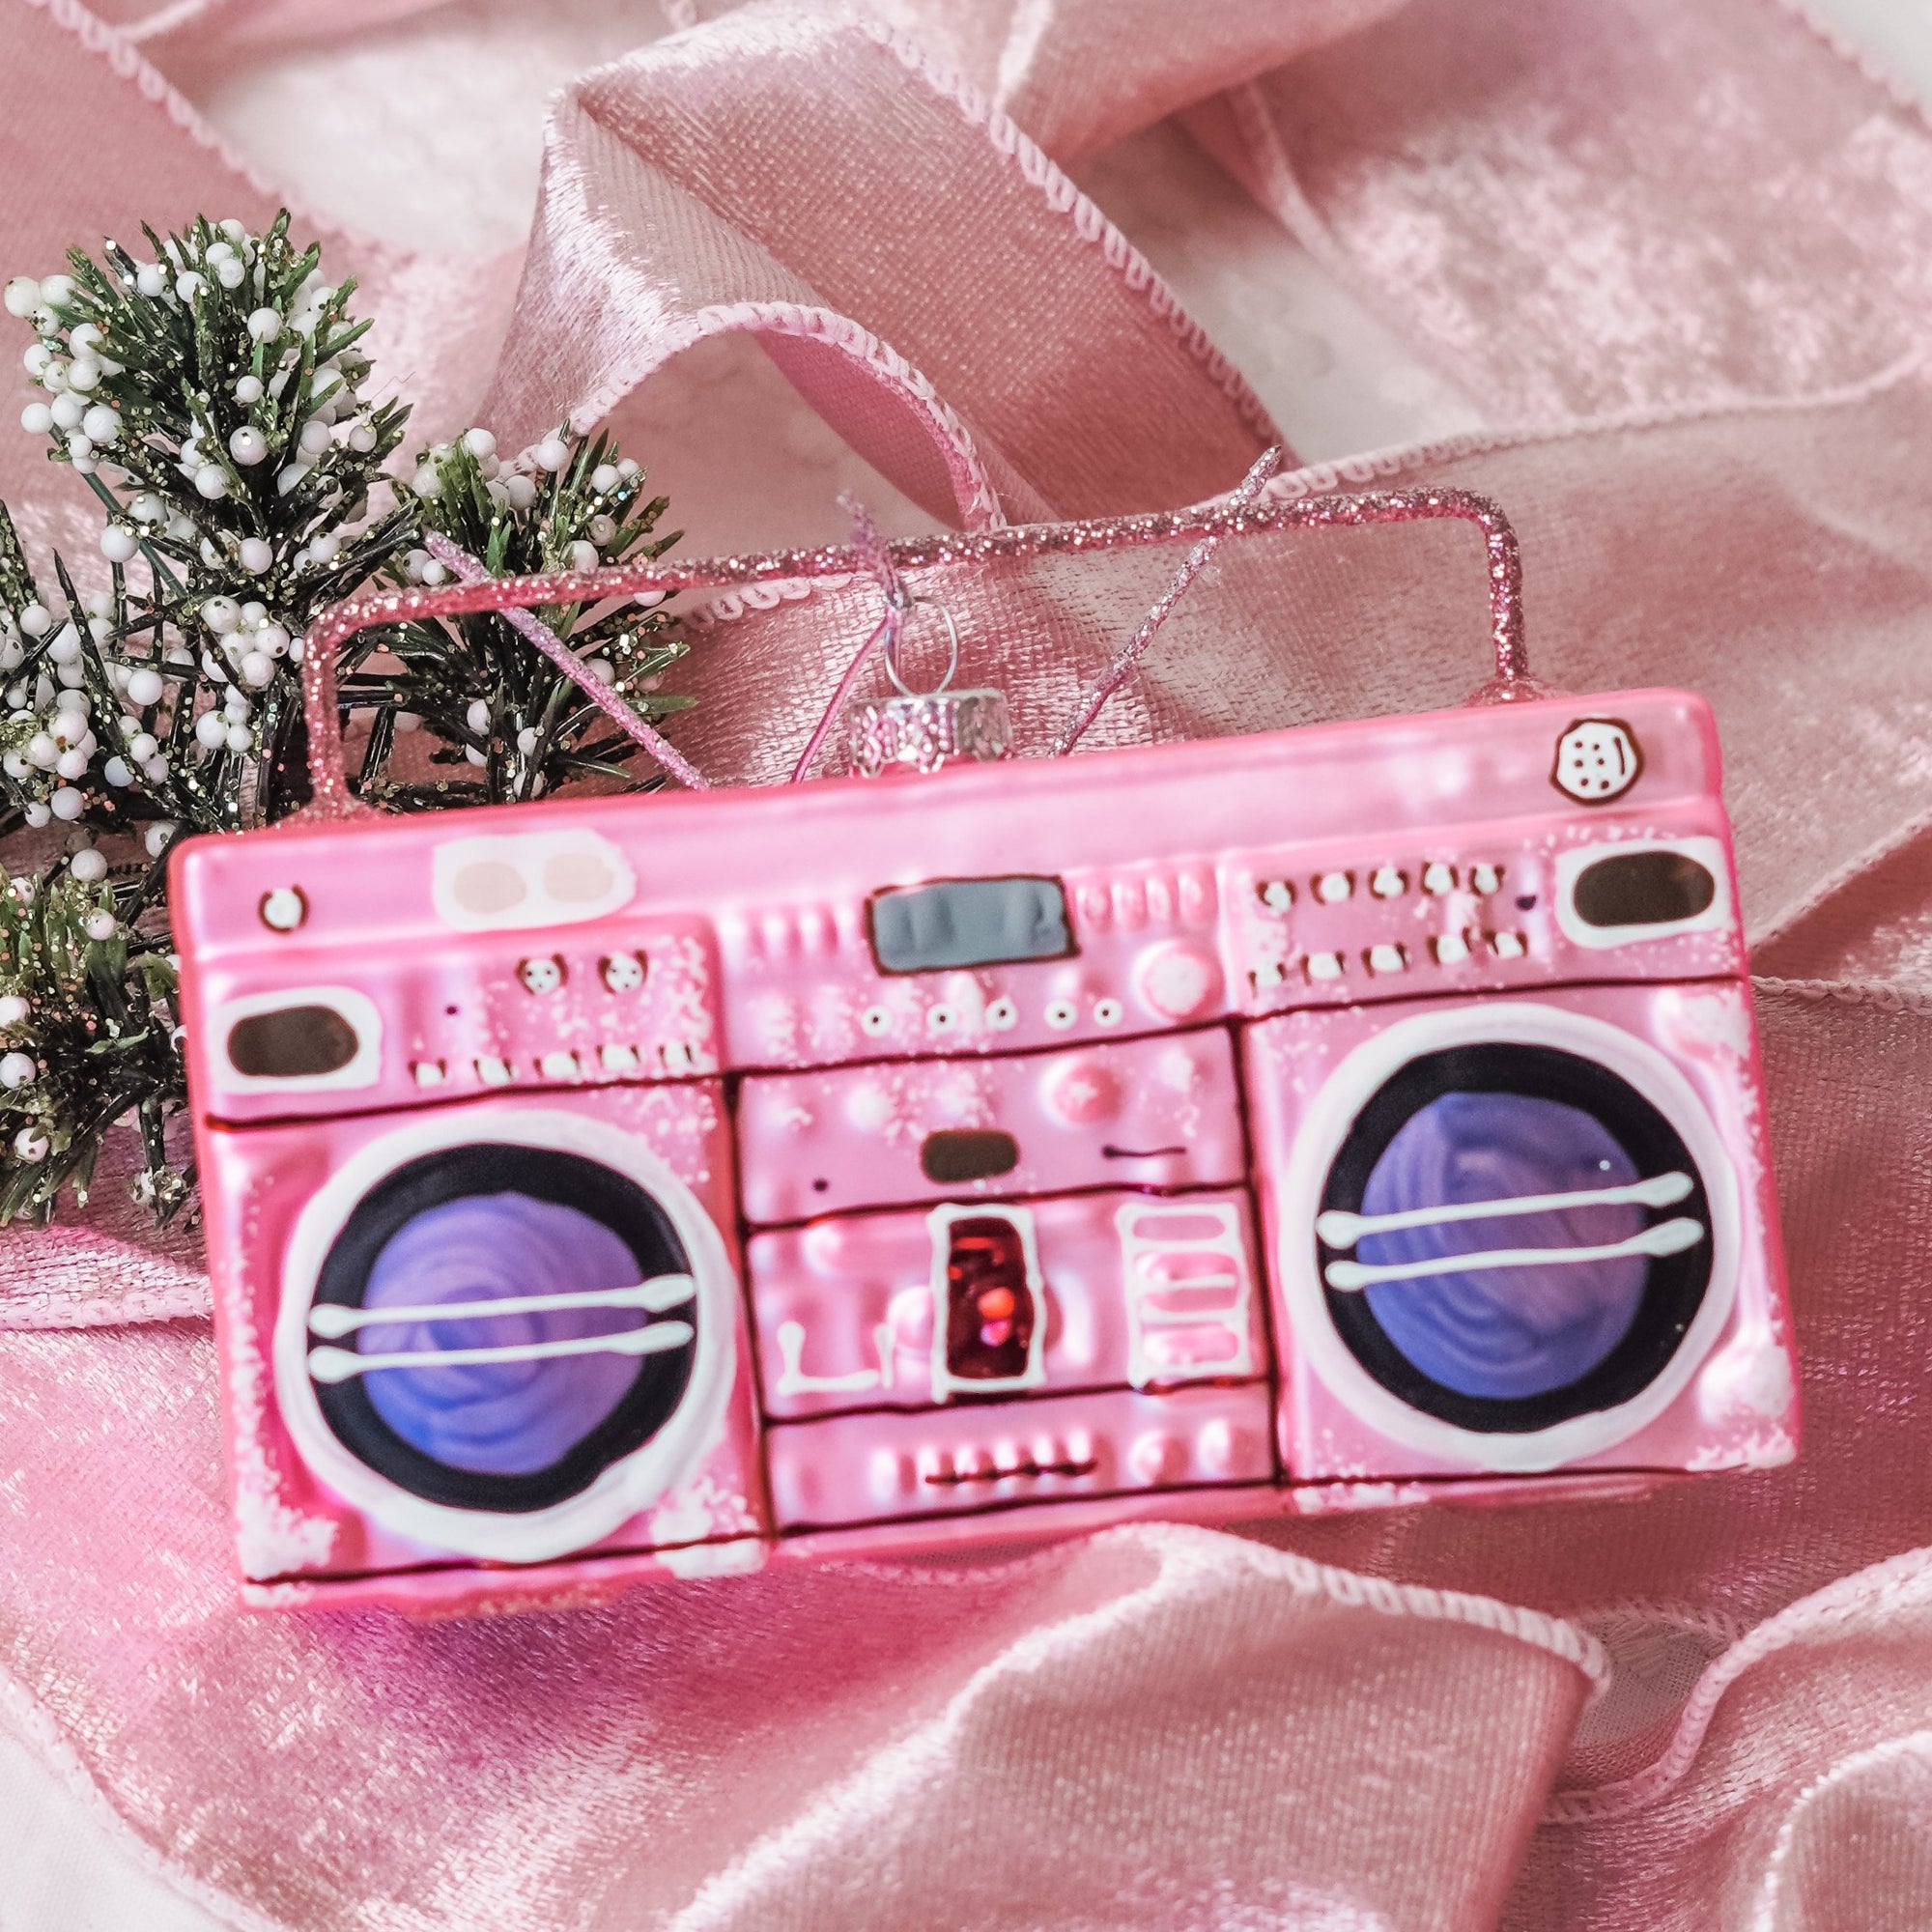 Remember when you and your girlfriends got your groove on to tunes booming out of your boombox? Celebrate the season with this nostalgic Boombox Ornament in Pink - a wonderful addition to your Christmas ornament collection this year!  Approximately 5 in. wide by 3 in. tall Made of glass.  Imported.